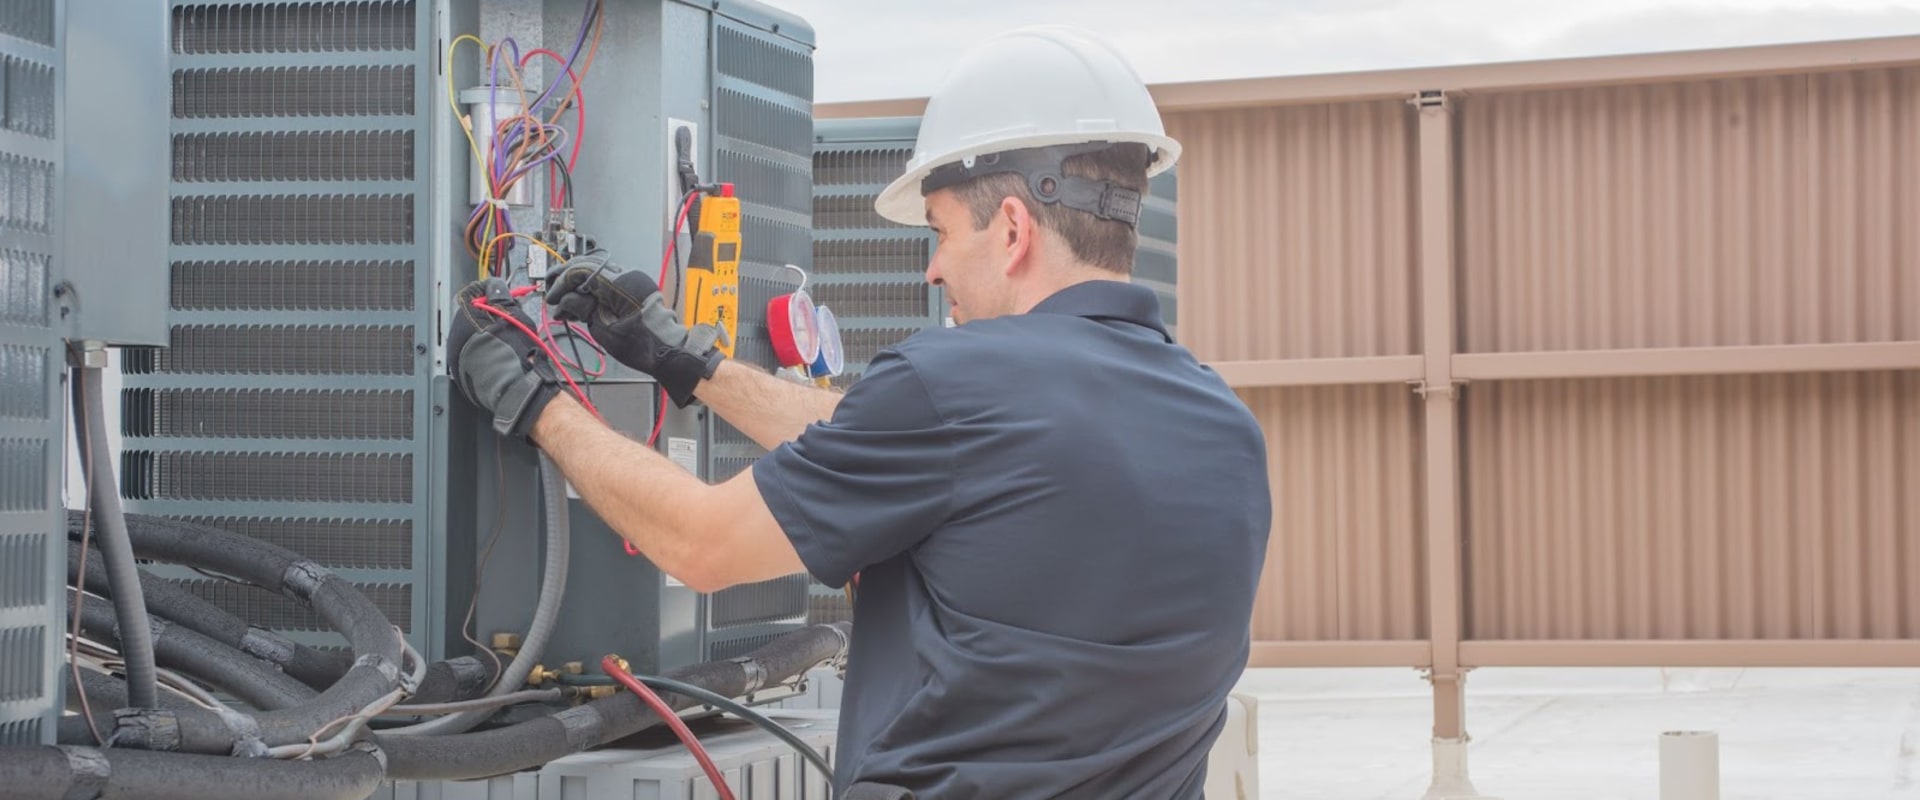 Certifying and Accrediting HVAC Maintenance Companies: What You Need to Know